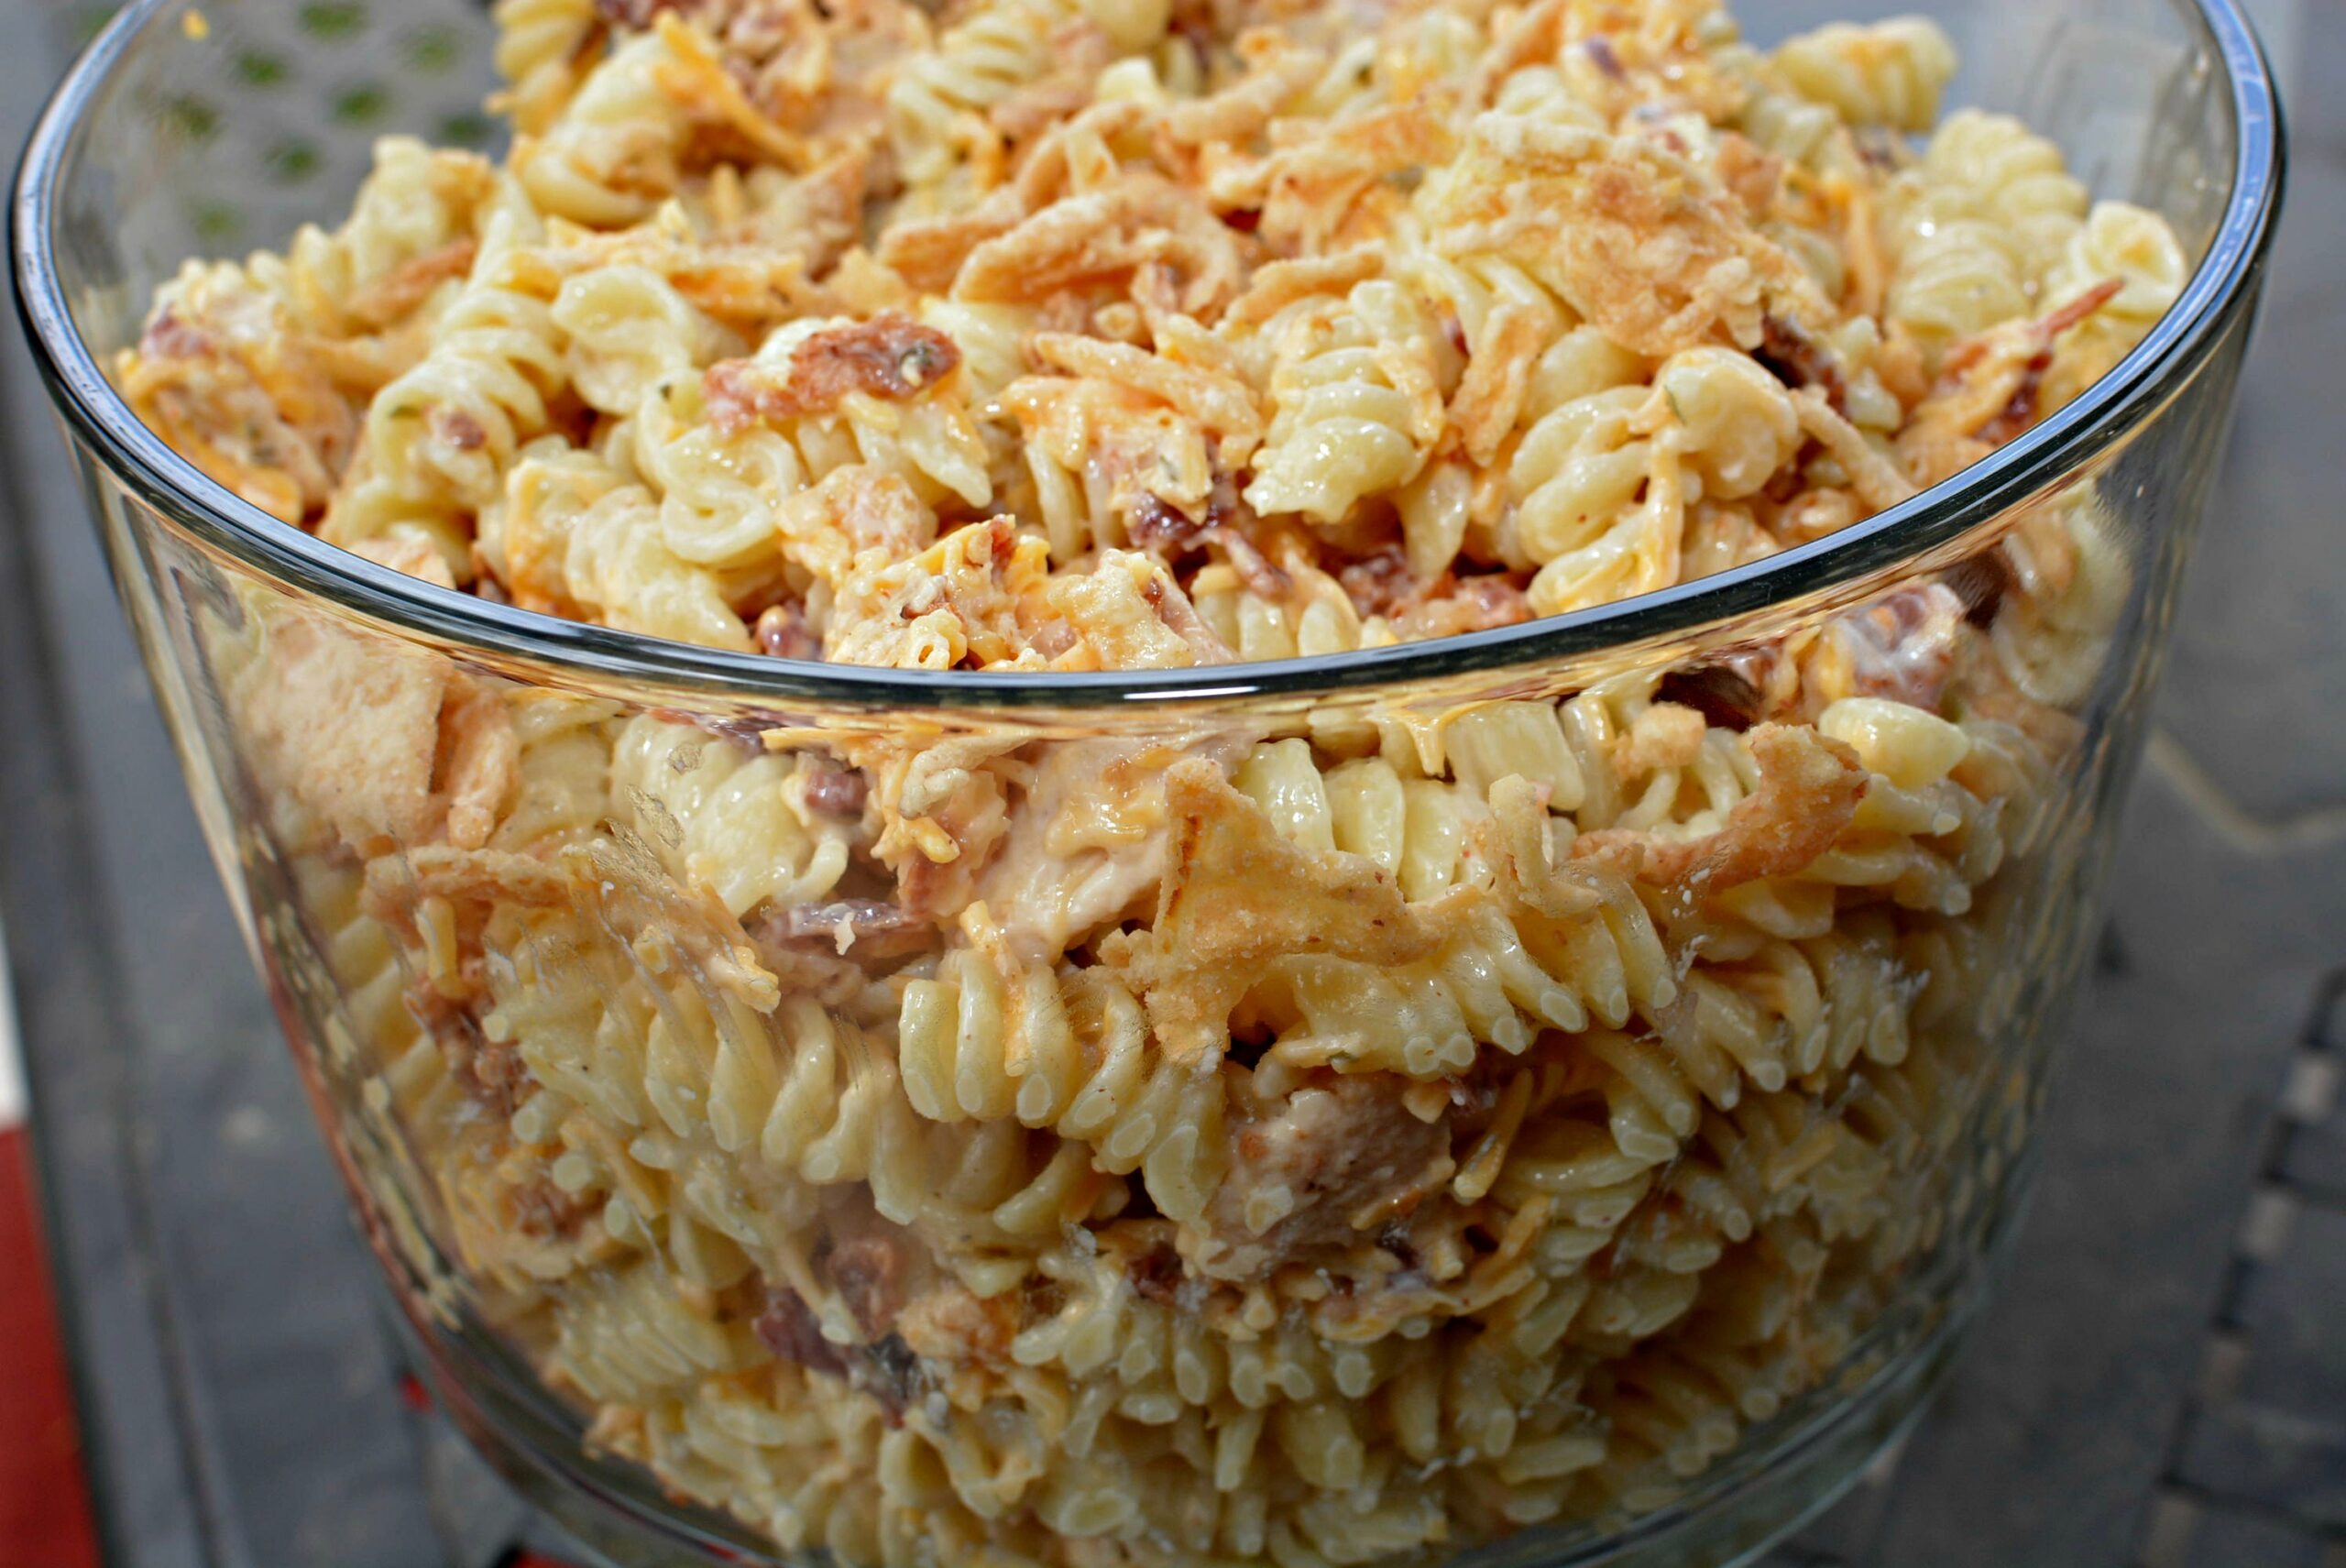 chicken, bacon, and ranch dressing combined into a flavorful pasta salad